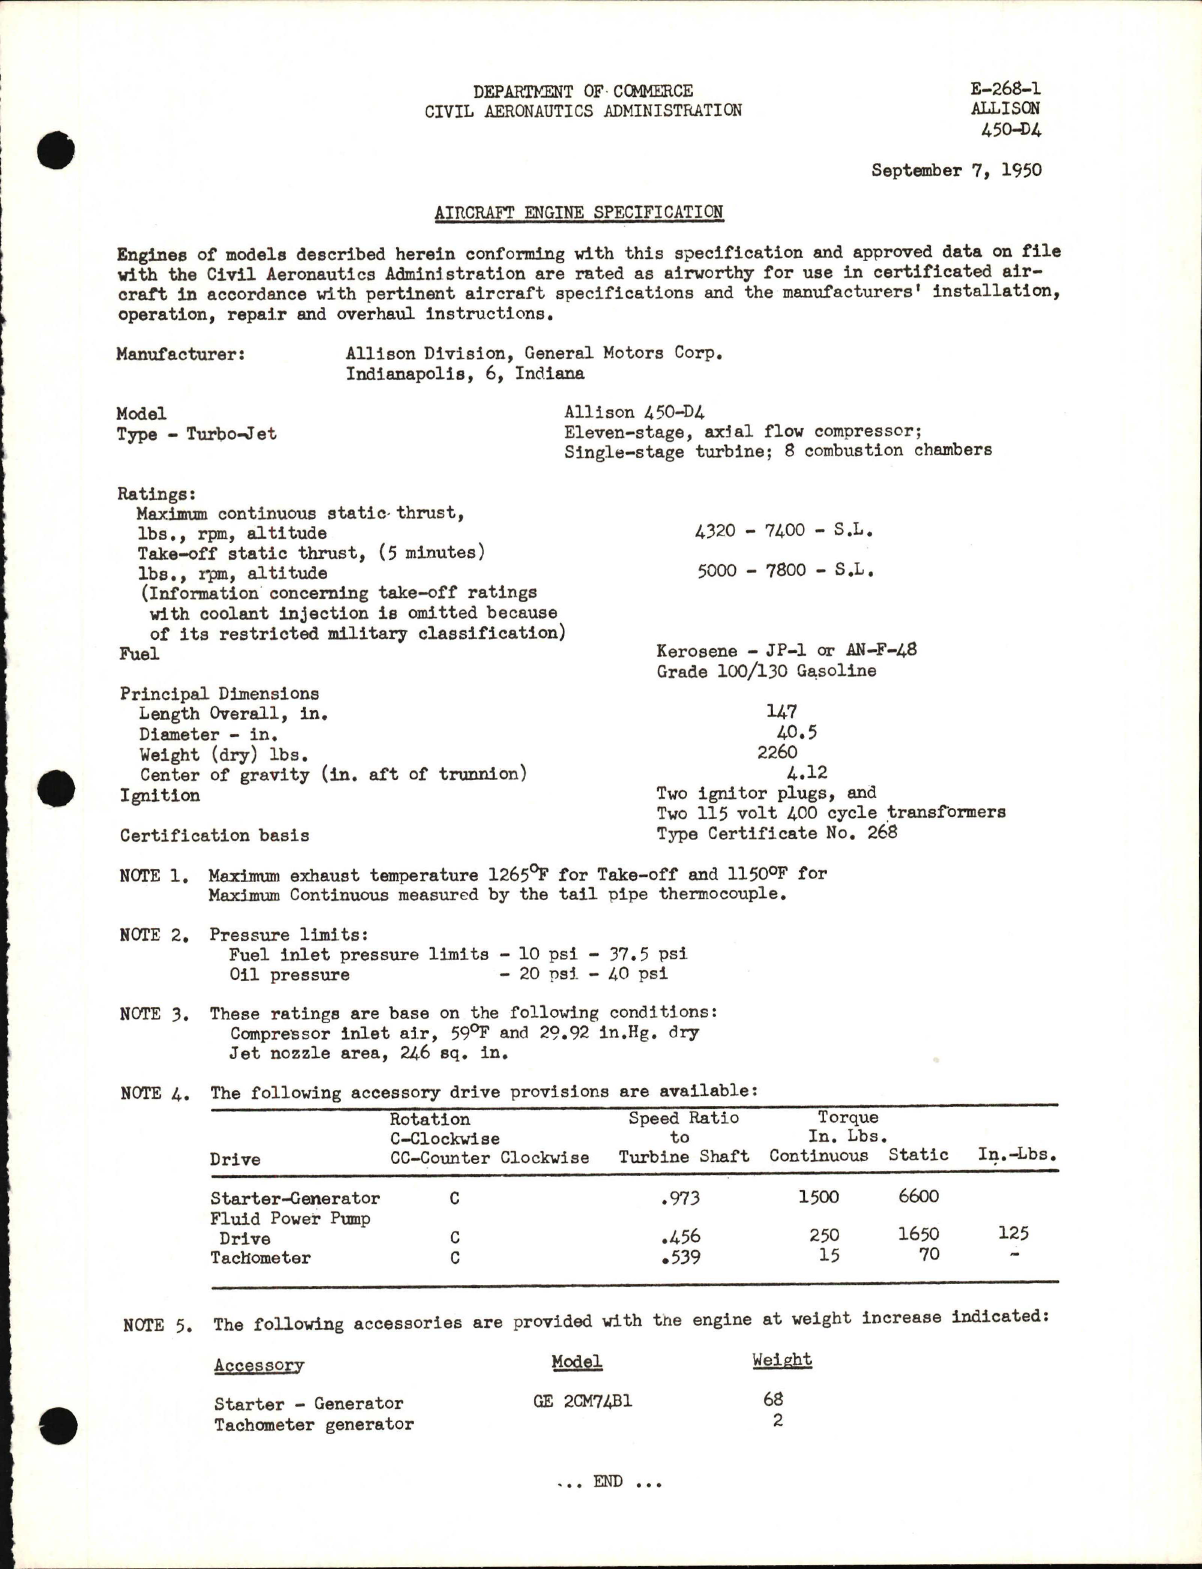 Sample page 1 from AirCorps Library document: 450-D4